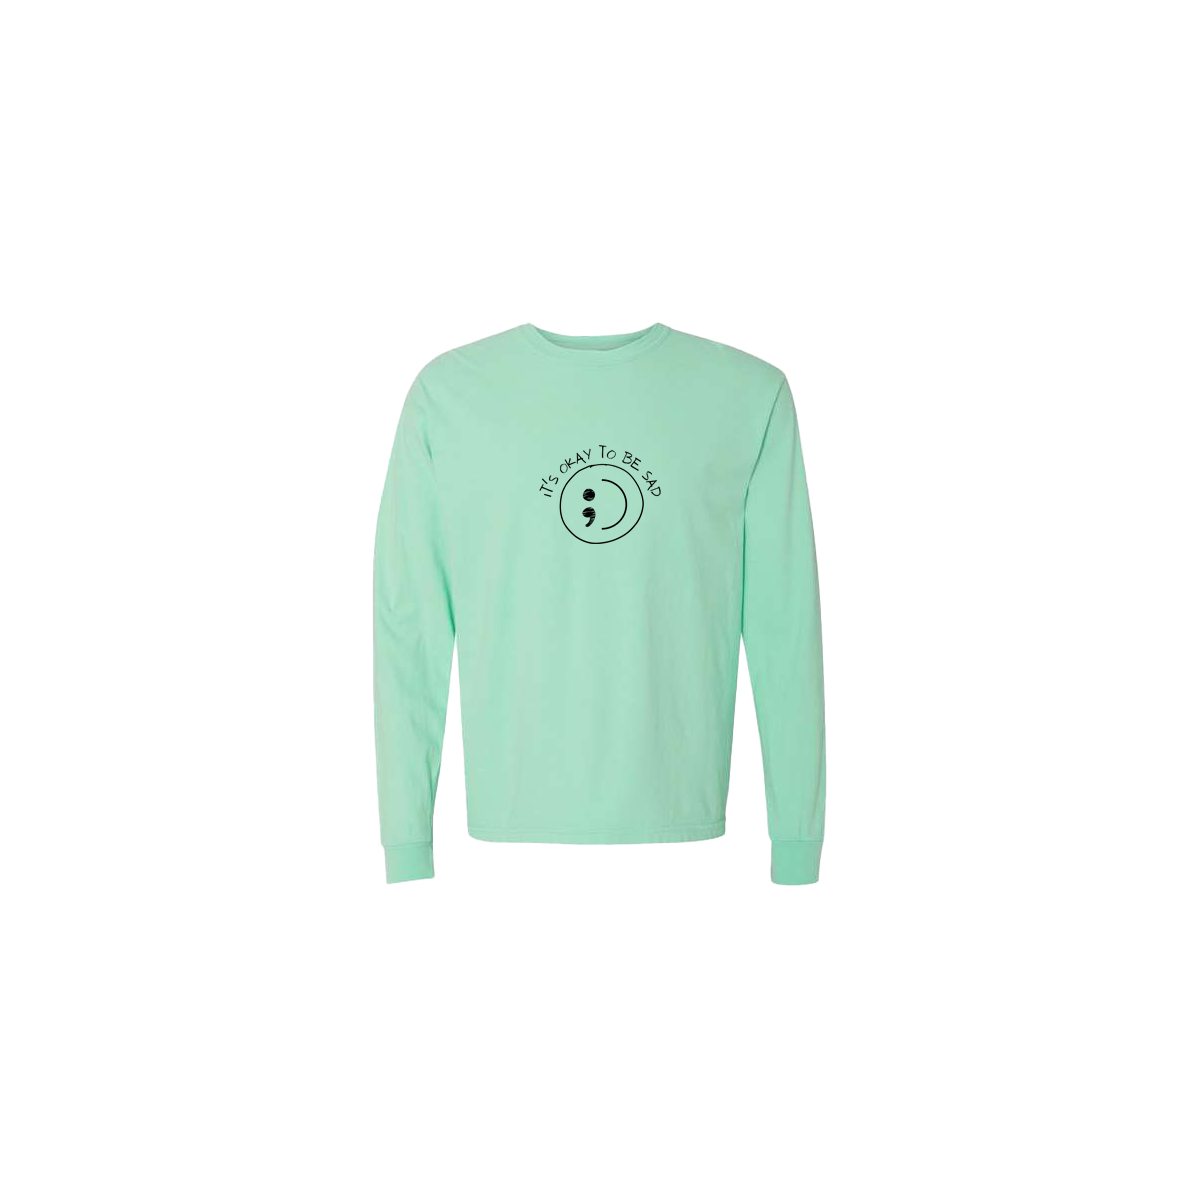 It's Okay to be Sad Embroidered Mint Long Sleeve Tshirt - Mental Health Awareness Clothing